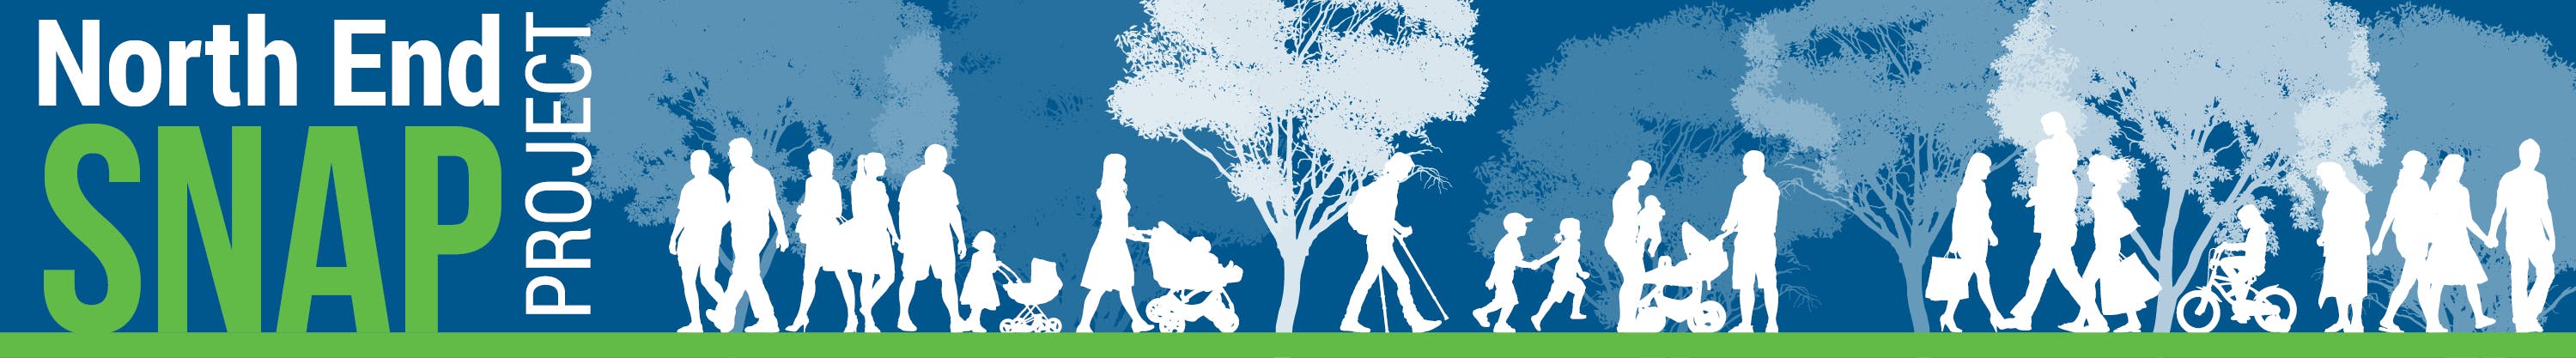 Promotion graphic displaying the sihouettes of various people walking amongst the trees